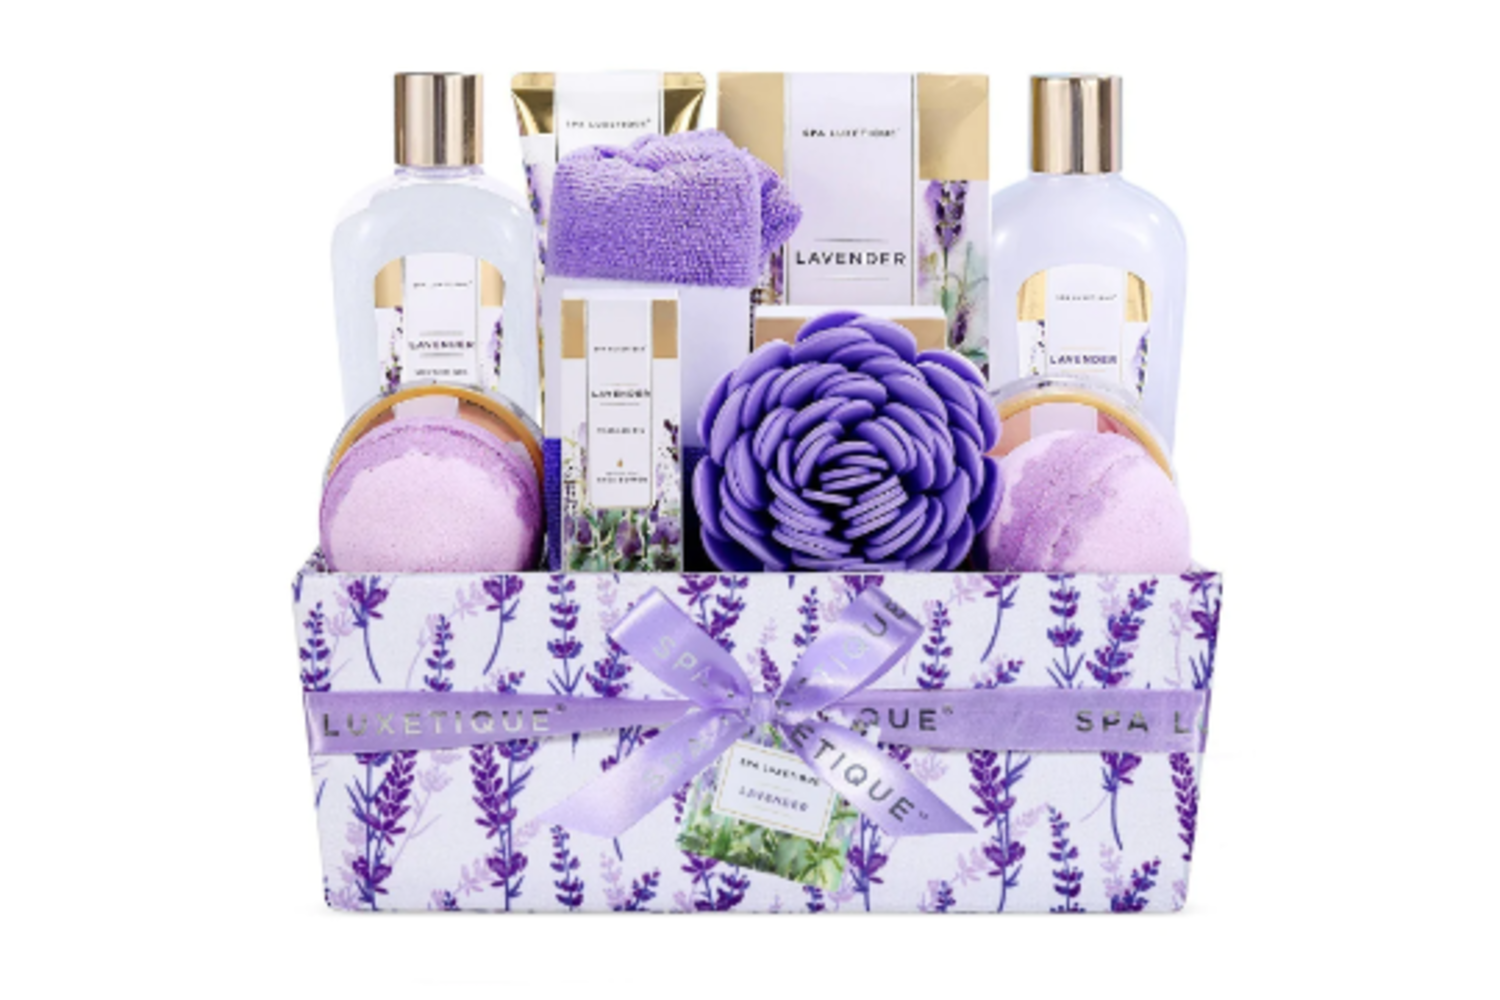 BRAND NEW LUXURY GIFT SETS IN TRADE & PALLET LOTS IN VARIOUS DESIGNS, SIZES, STYLES & FRAGRANCES - IDEAL FOR MOTHERS DAY!